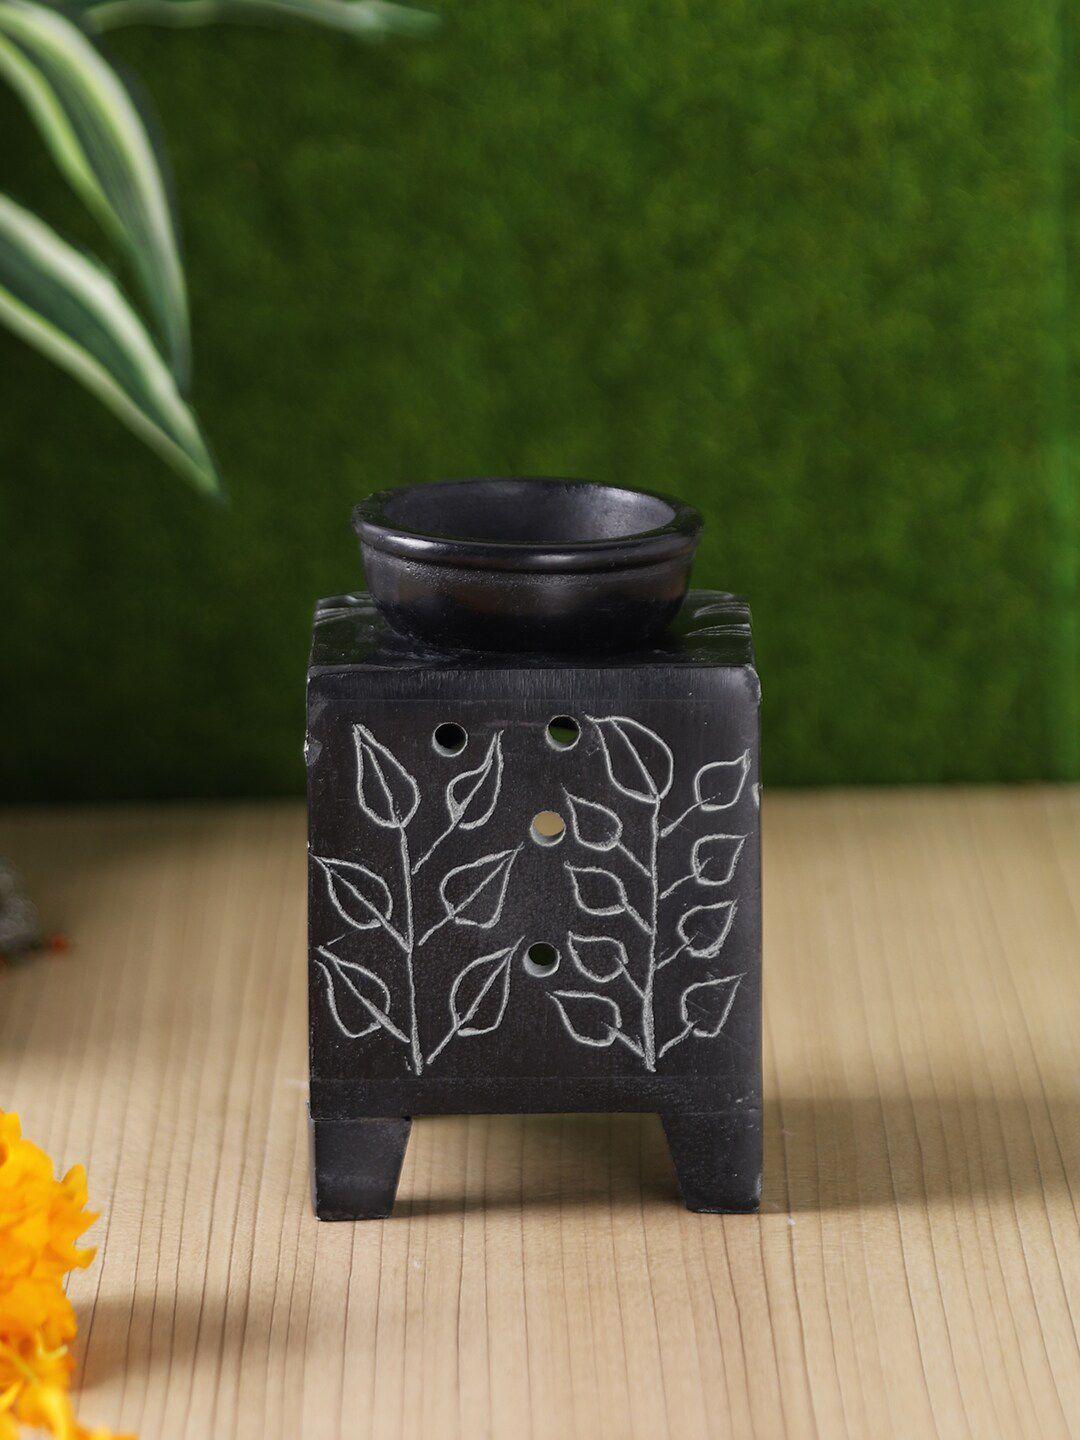 Aapno Rajasthan Printed Aroma Oil Diffusers Price in India